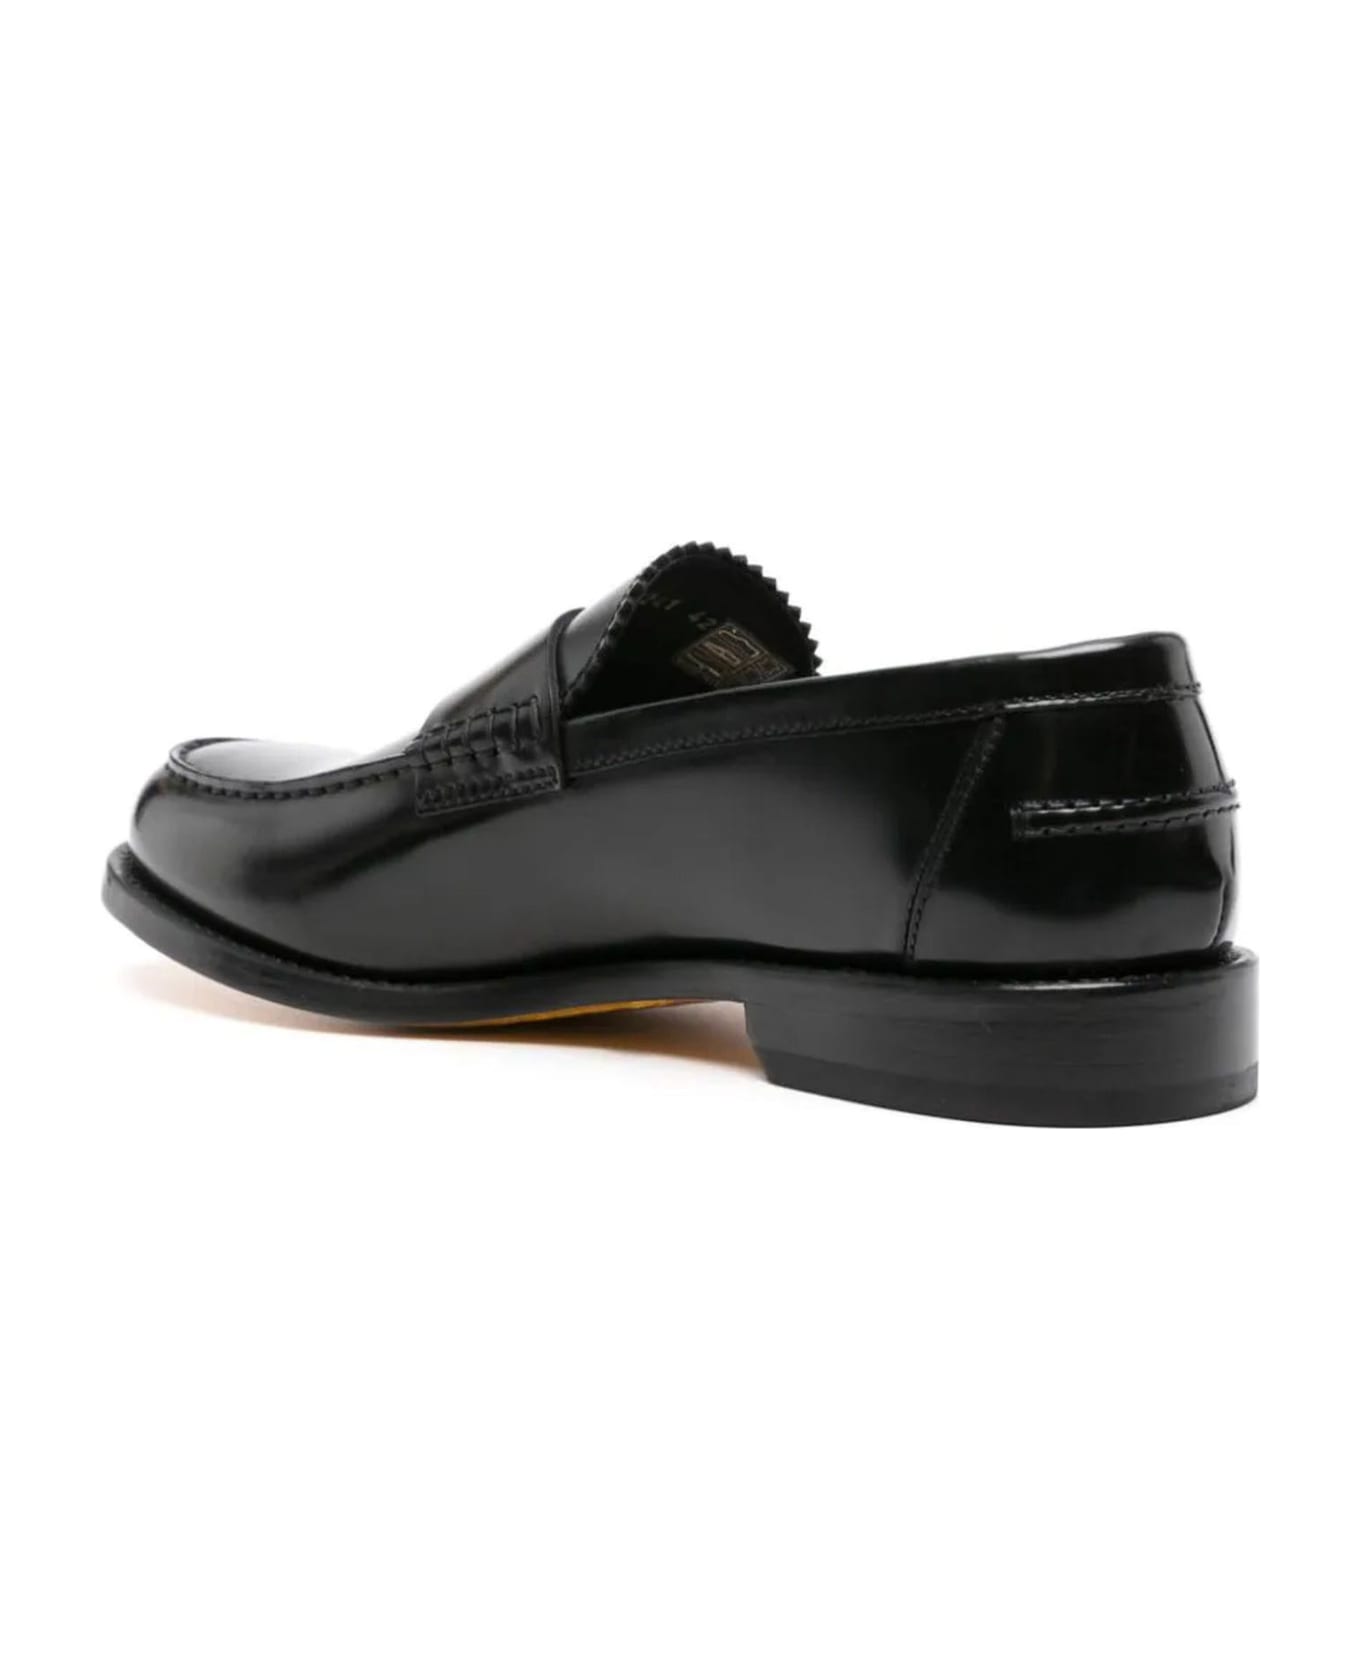 Doucal's Loafer In Black Leather - Black